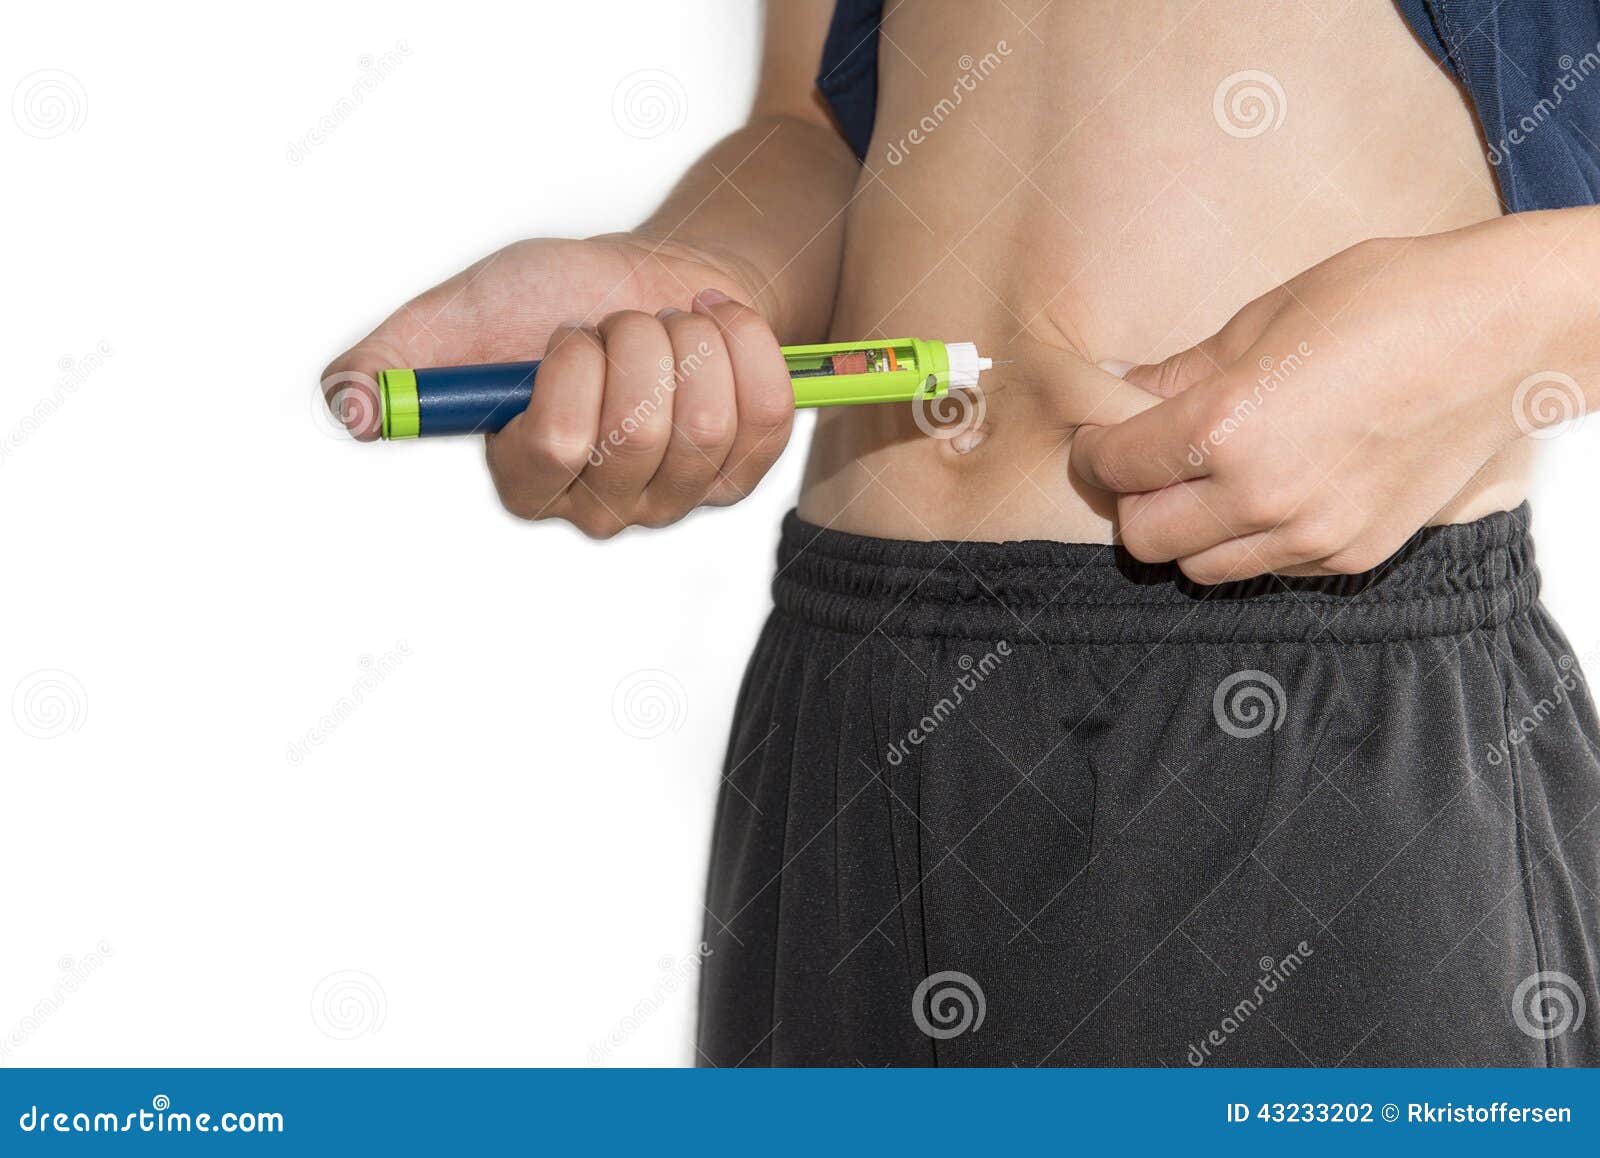 boy ready to inject insulin